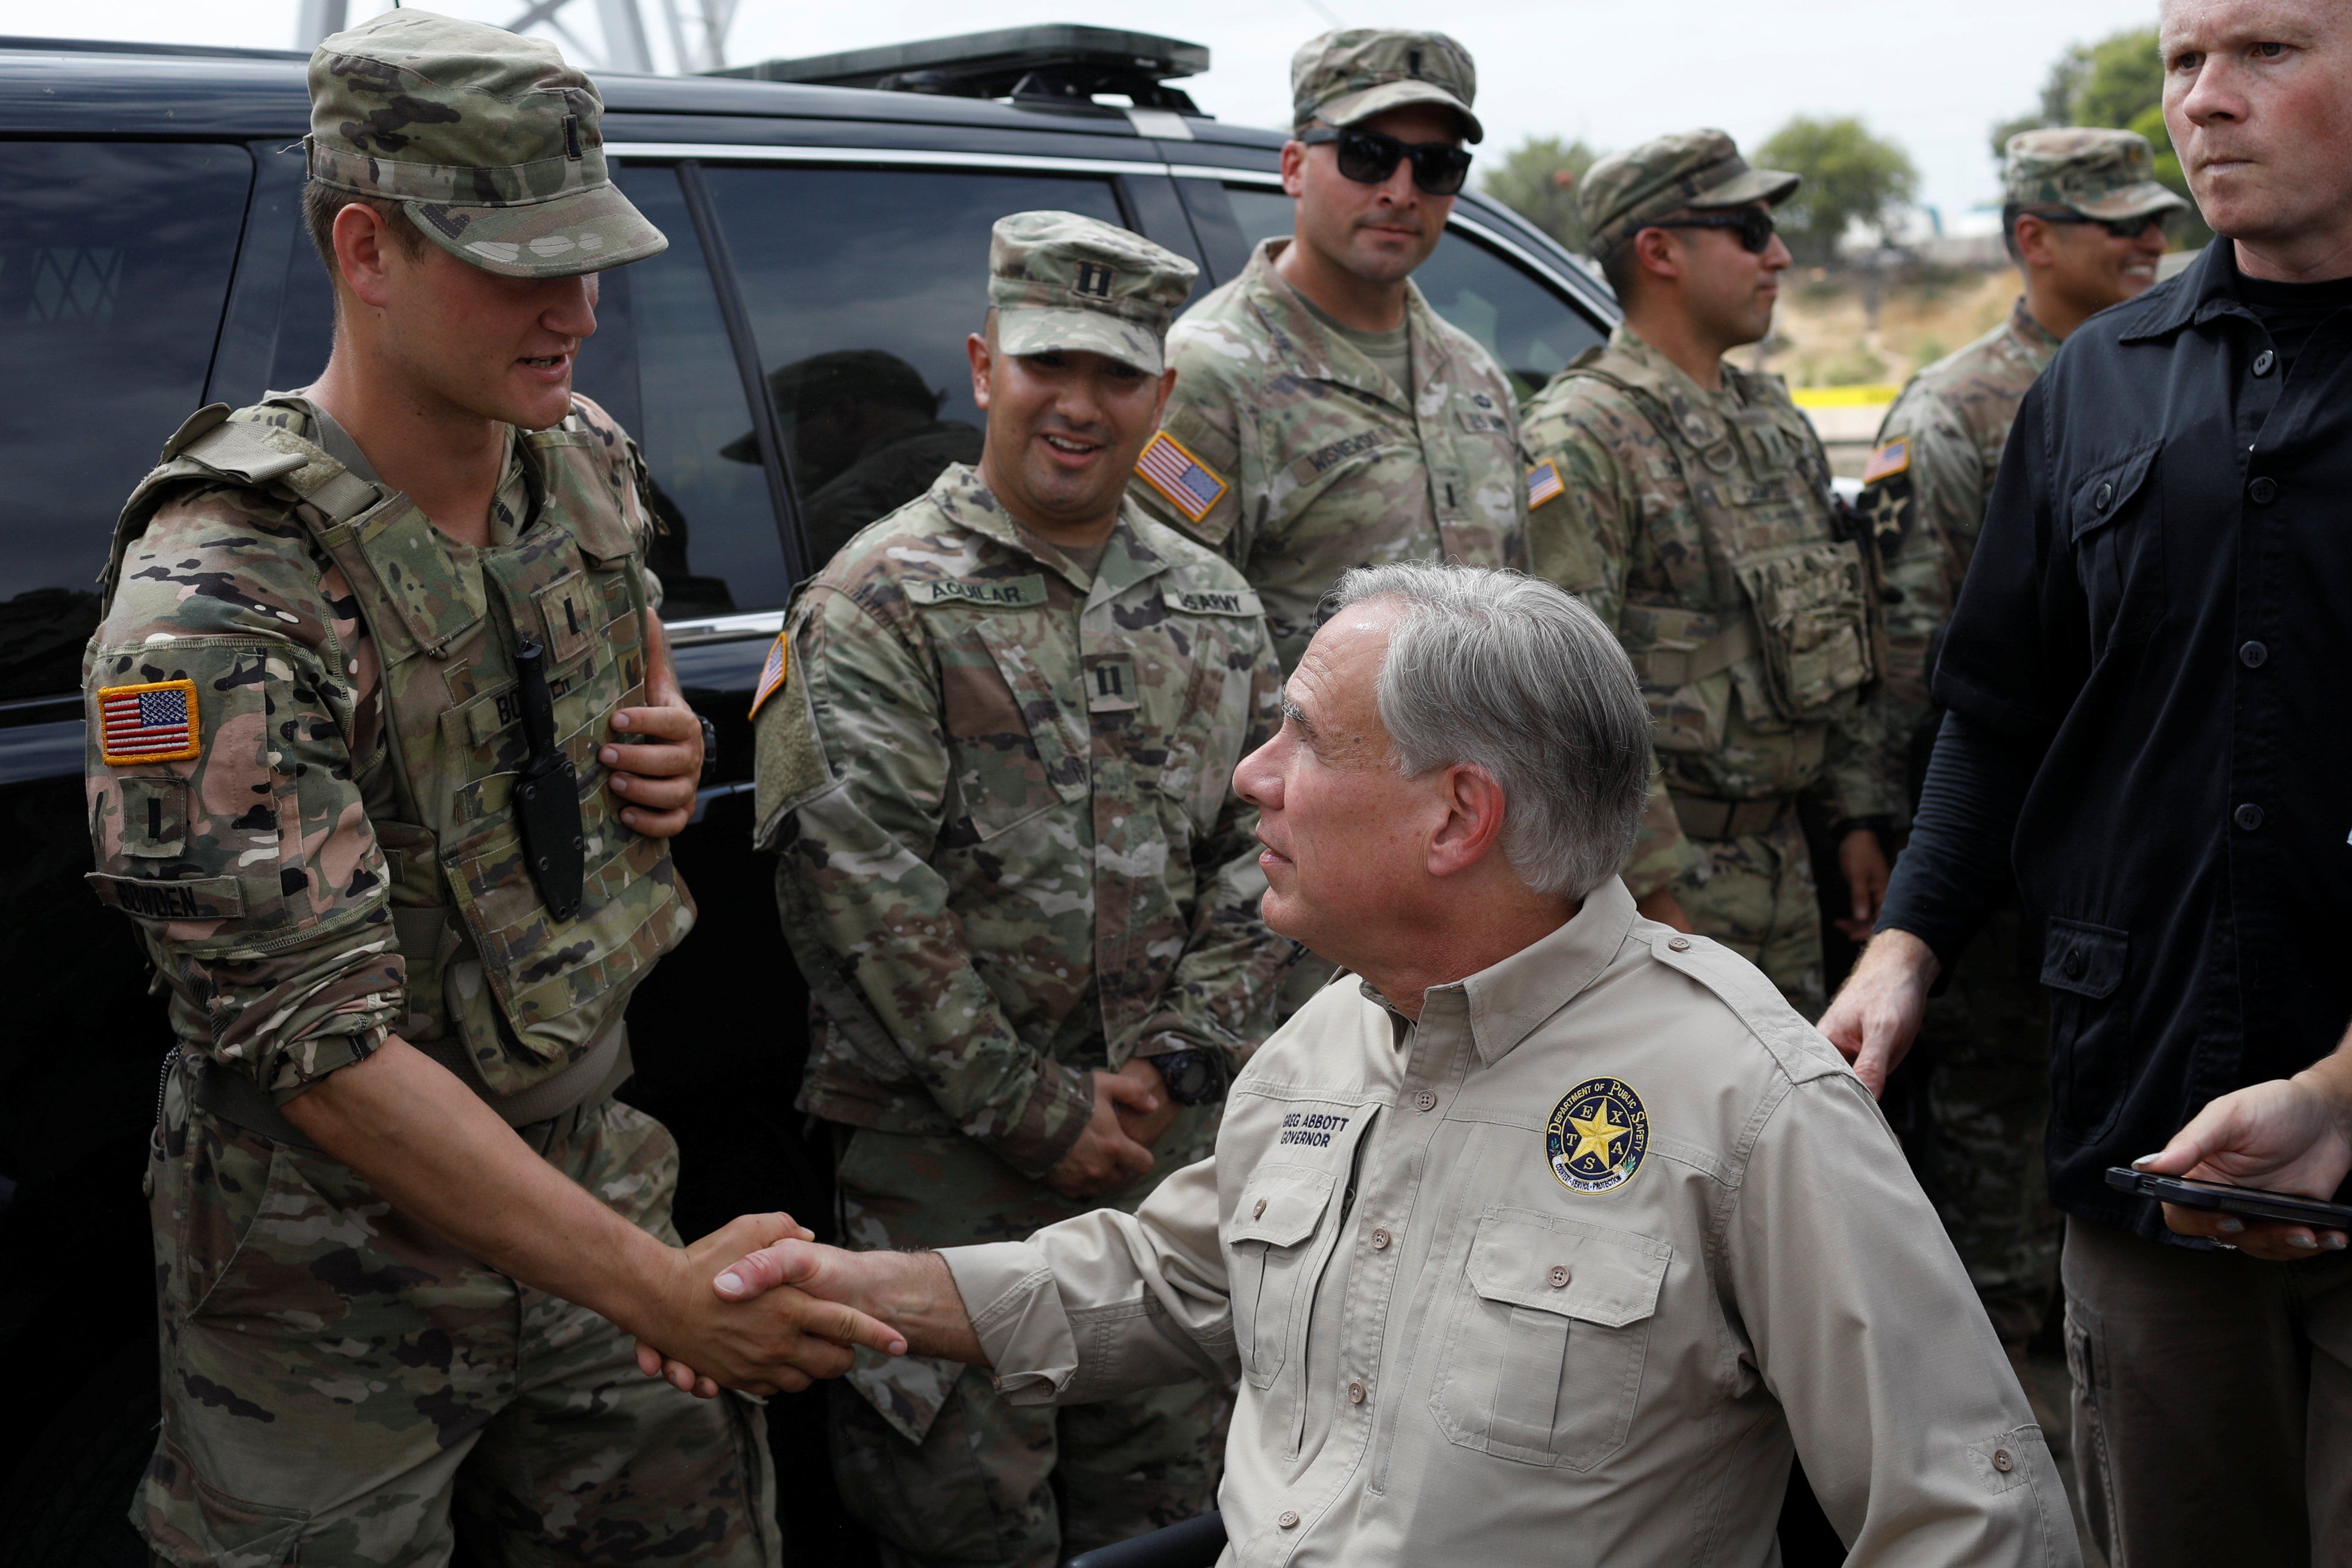 ​Texas Governor Gregg Abbott shakes hands with a U.S. Soldier after a news conference near the International Bridge between Mexico and the U.S., where migrants seeking asylum in the U.S. are waiting to be processed, in Del Rio, Texas, U.S., September 21, 2021. 